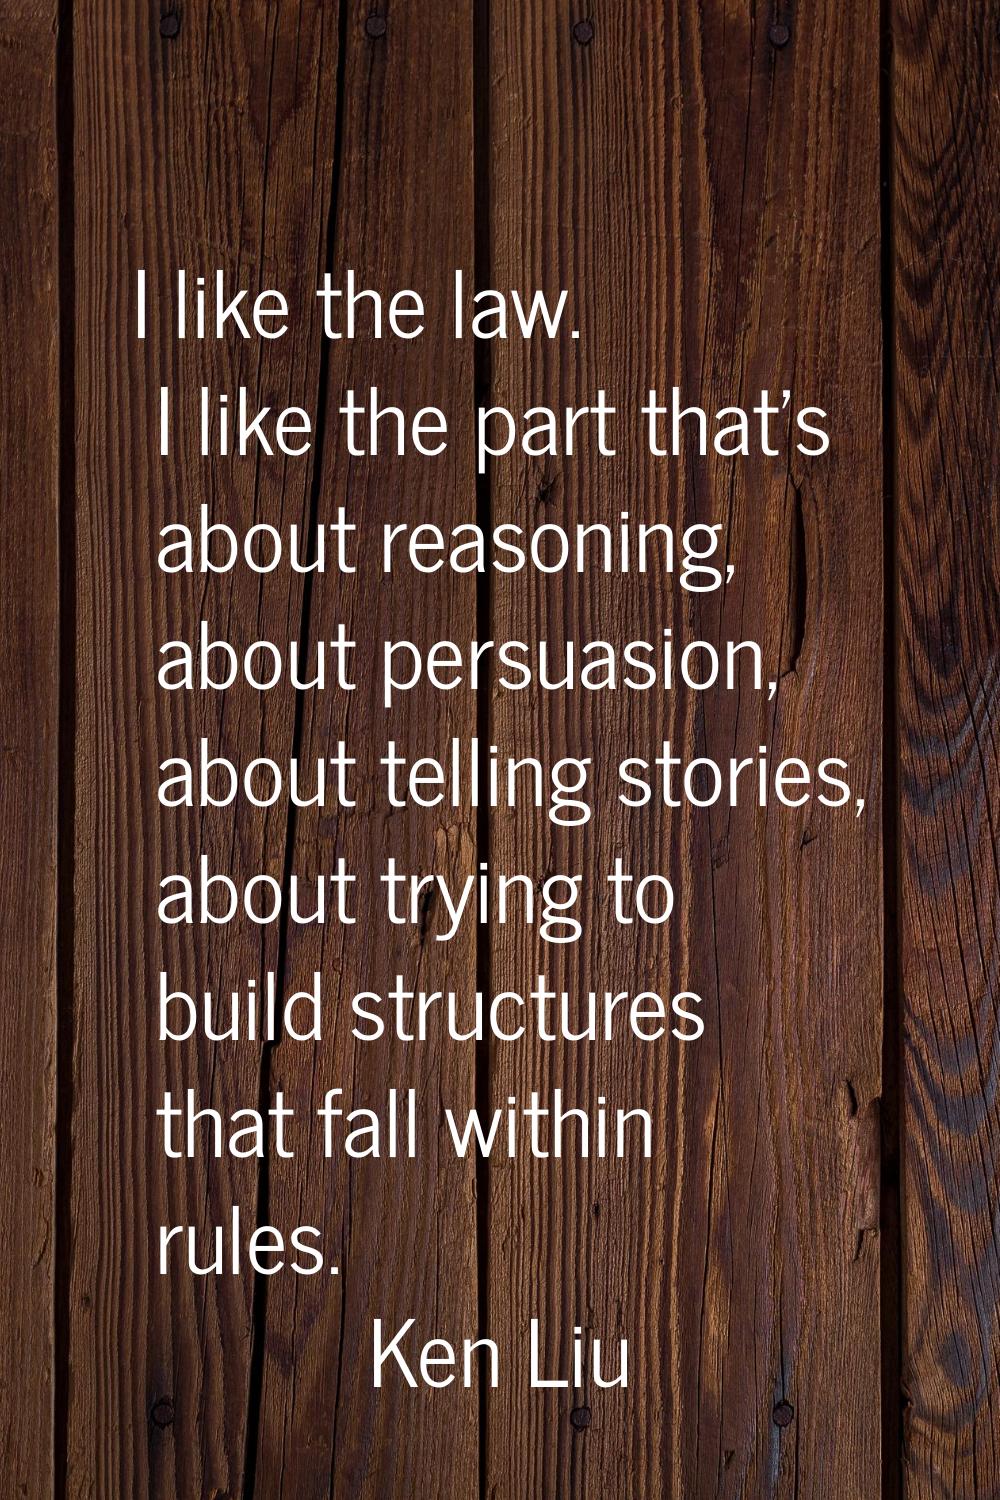 I like the law. I like the part that's about reasoning, about persuasion, about telling stories, ab